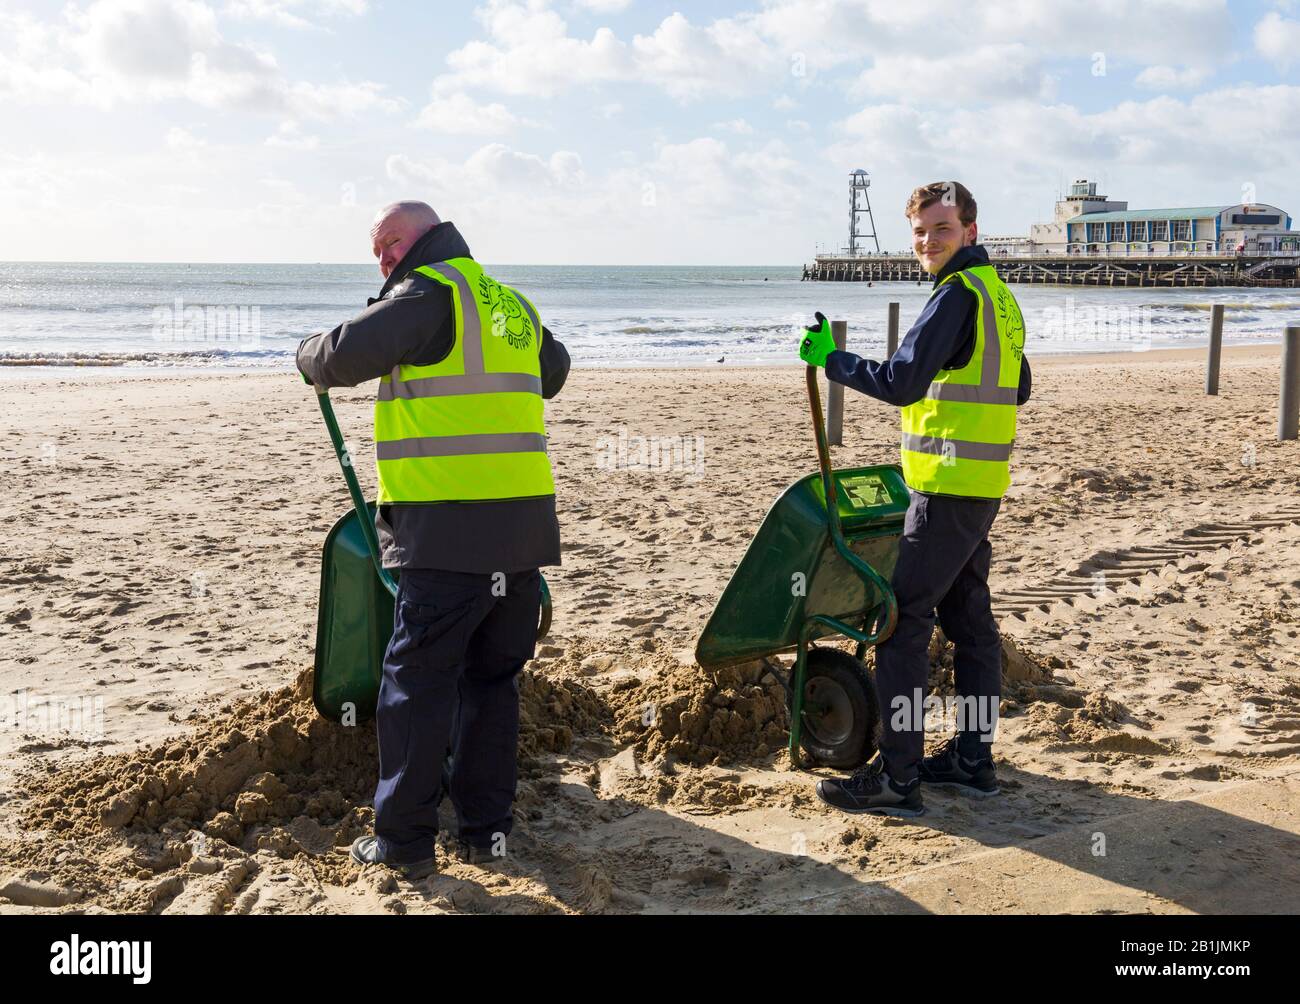 Bournemouth, Dorset, UK. 26th Feb 2020. Councillor Lewis Allison (on the right), gets stuck in and gives the seafront rangers (Terry, left) a hand to clear the sand from the promenade, blown up from the recent strong winds and Storm Dennis.   Councillor Allison is Labour Councillor for Boscombe West and Portfolio Holder, Cabinet Member, for Tourism, Leisure and Communities at BCP (Bournemouth, Christchurch and Poole) Council.  Credit: Carolyn Jenkins/Alamy Live News Stock Photo